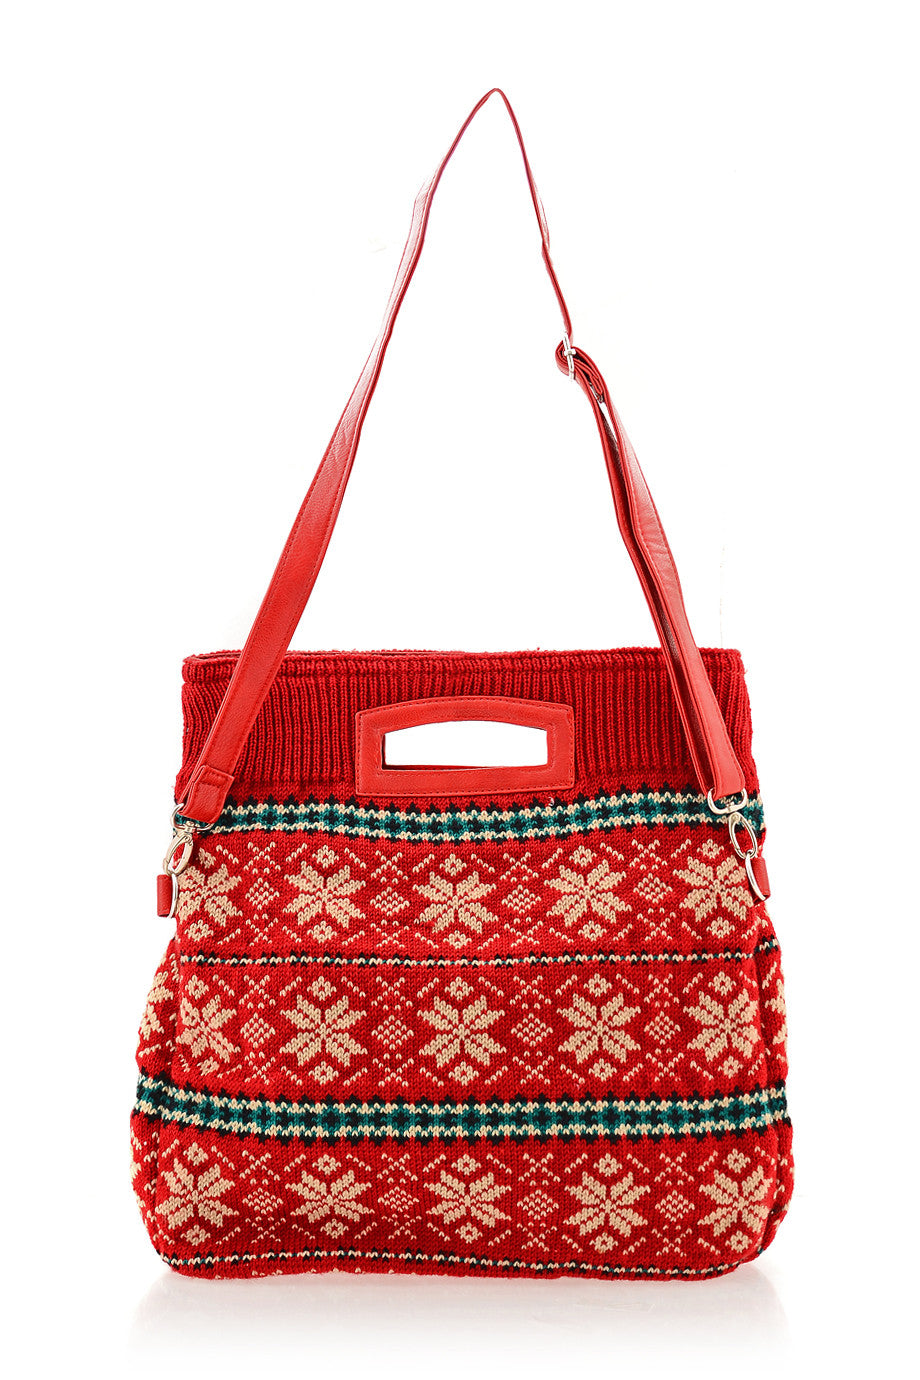 MERILLY Red Knitted Bag